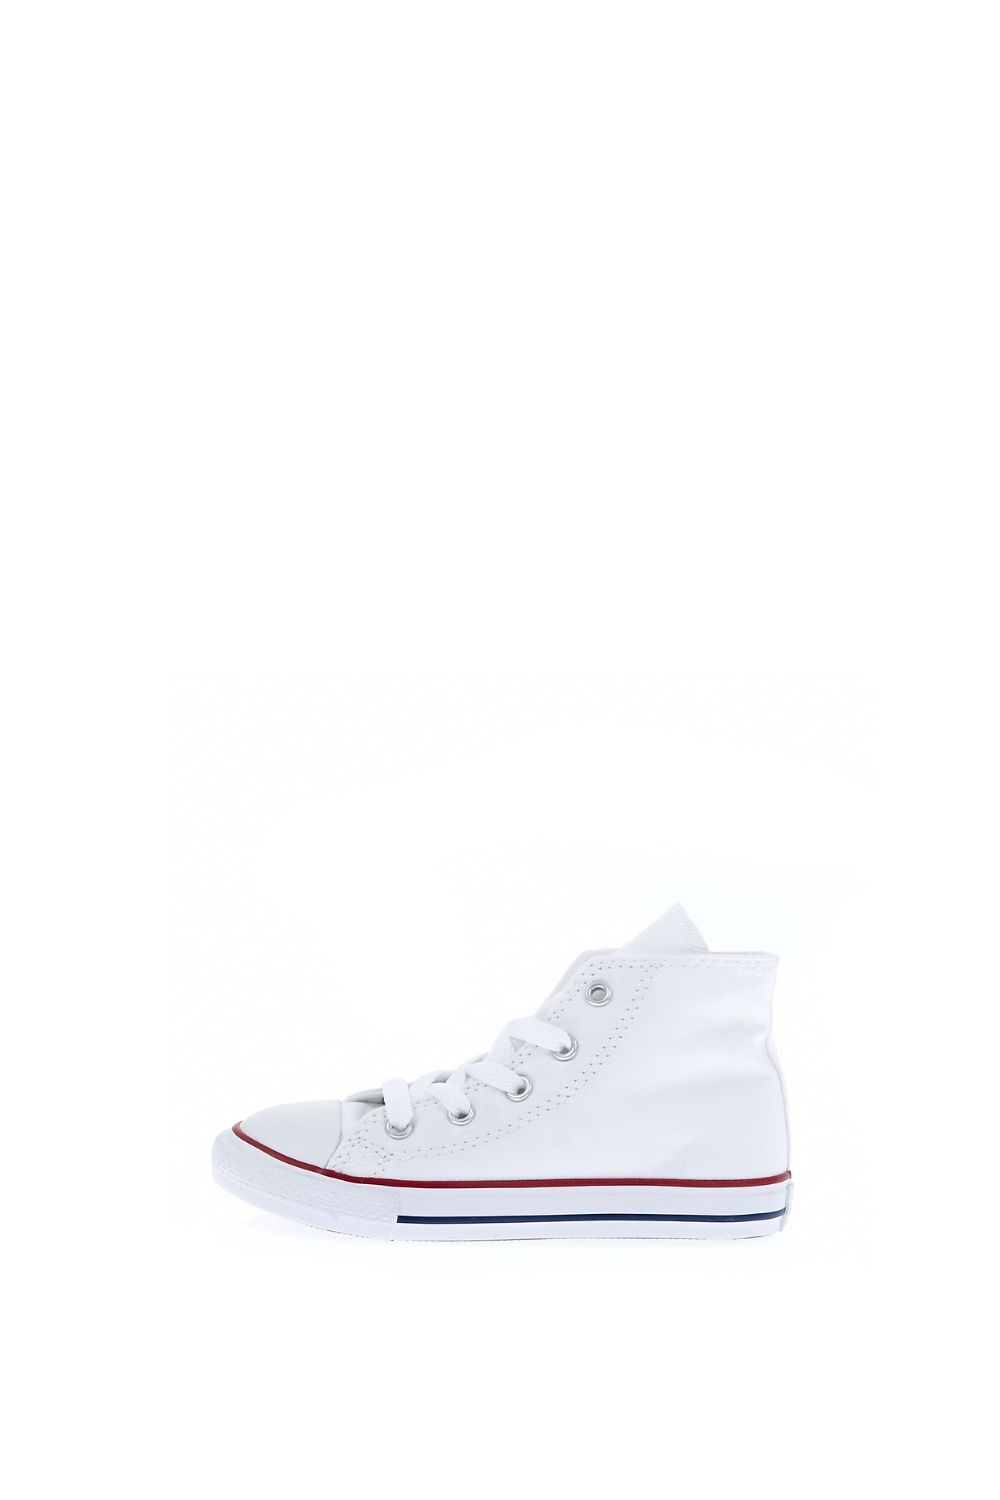 CONVERSE - Βρεφικά παπούτσια Chuck Taylor All Star Hi λευκά Παιδικά/Baby/Παπούτσια/Sneakers